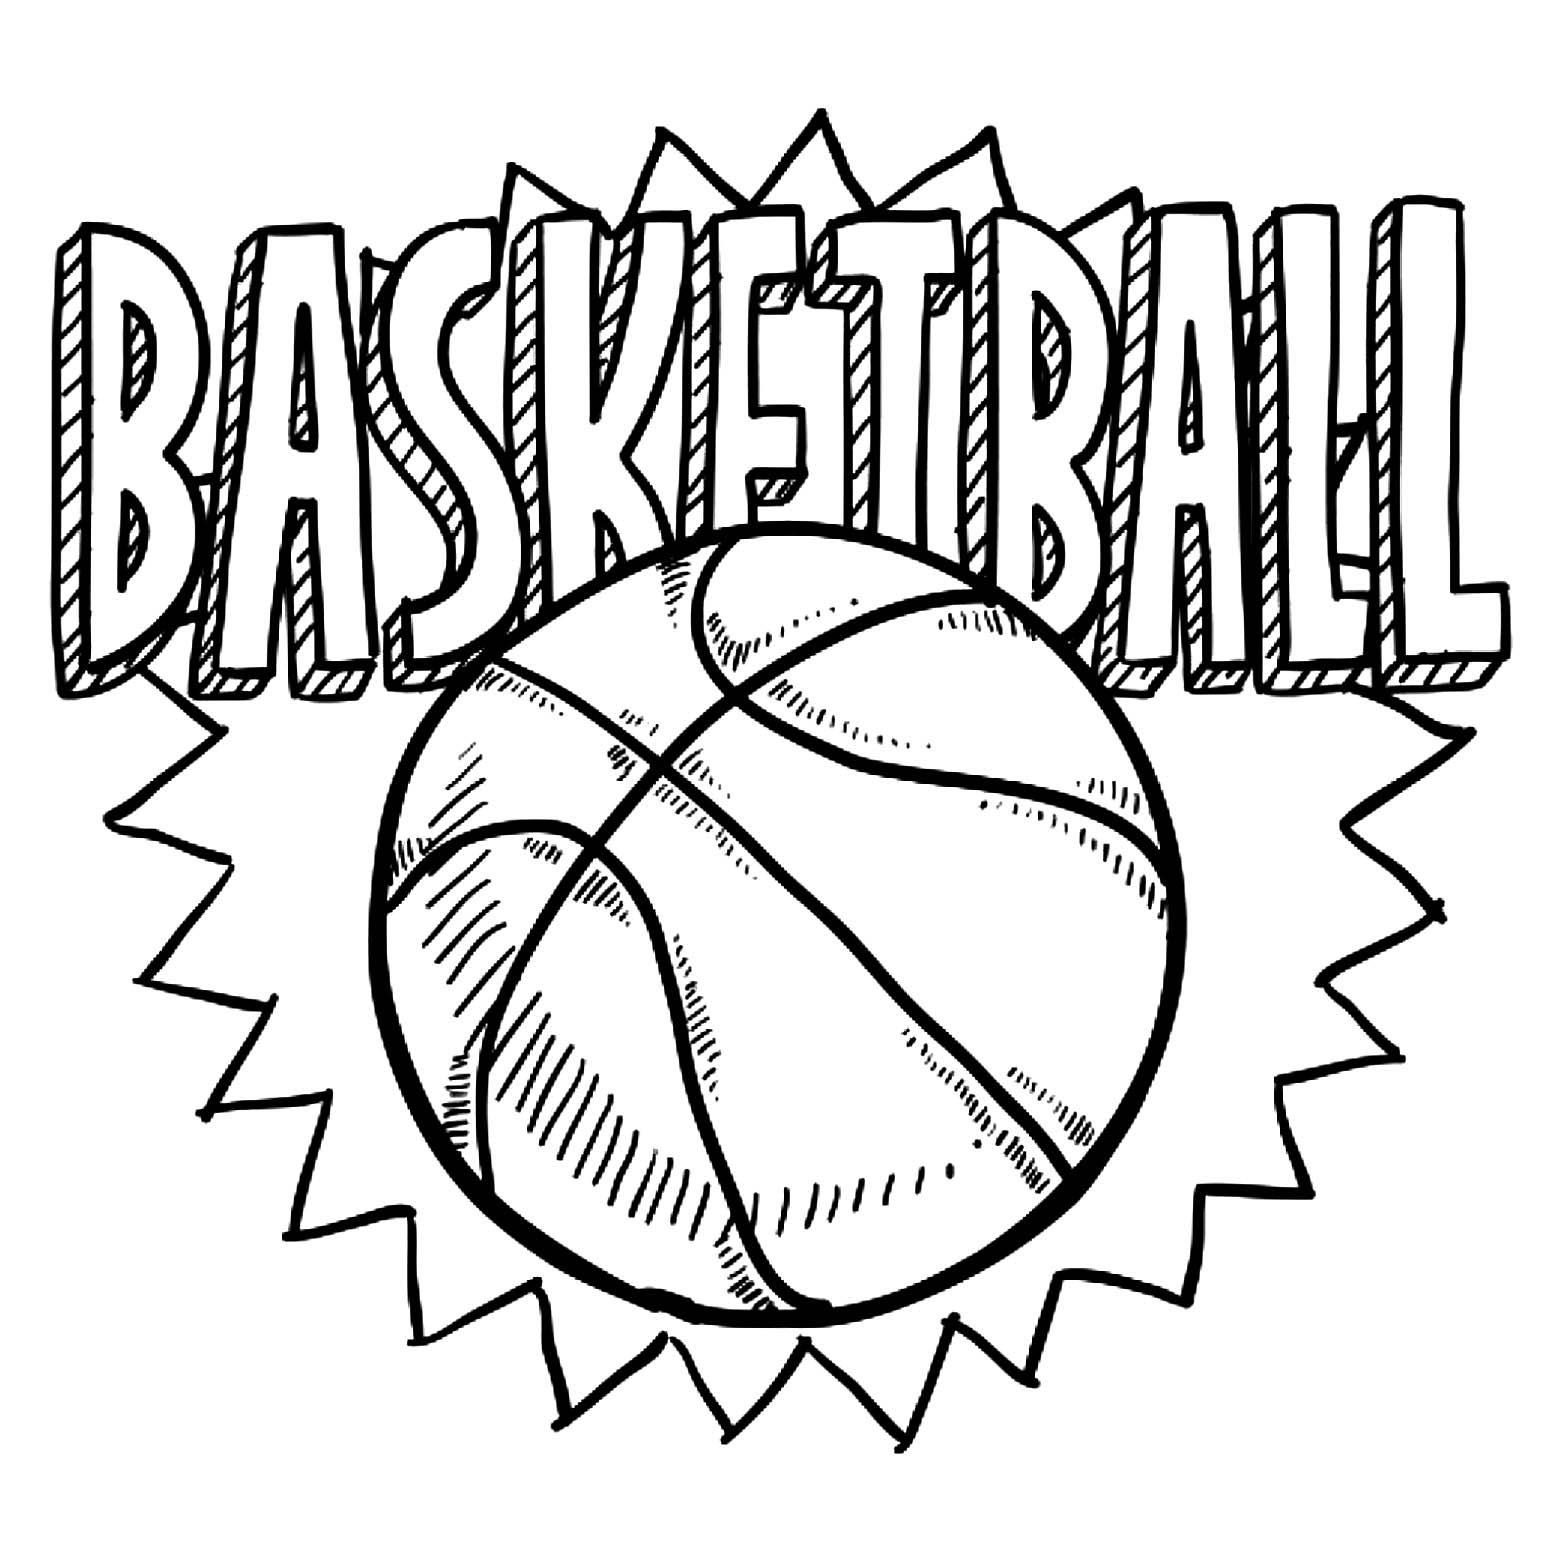 Basketball image to download and color - Basketball Kids Coloring Pages